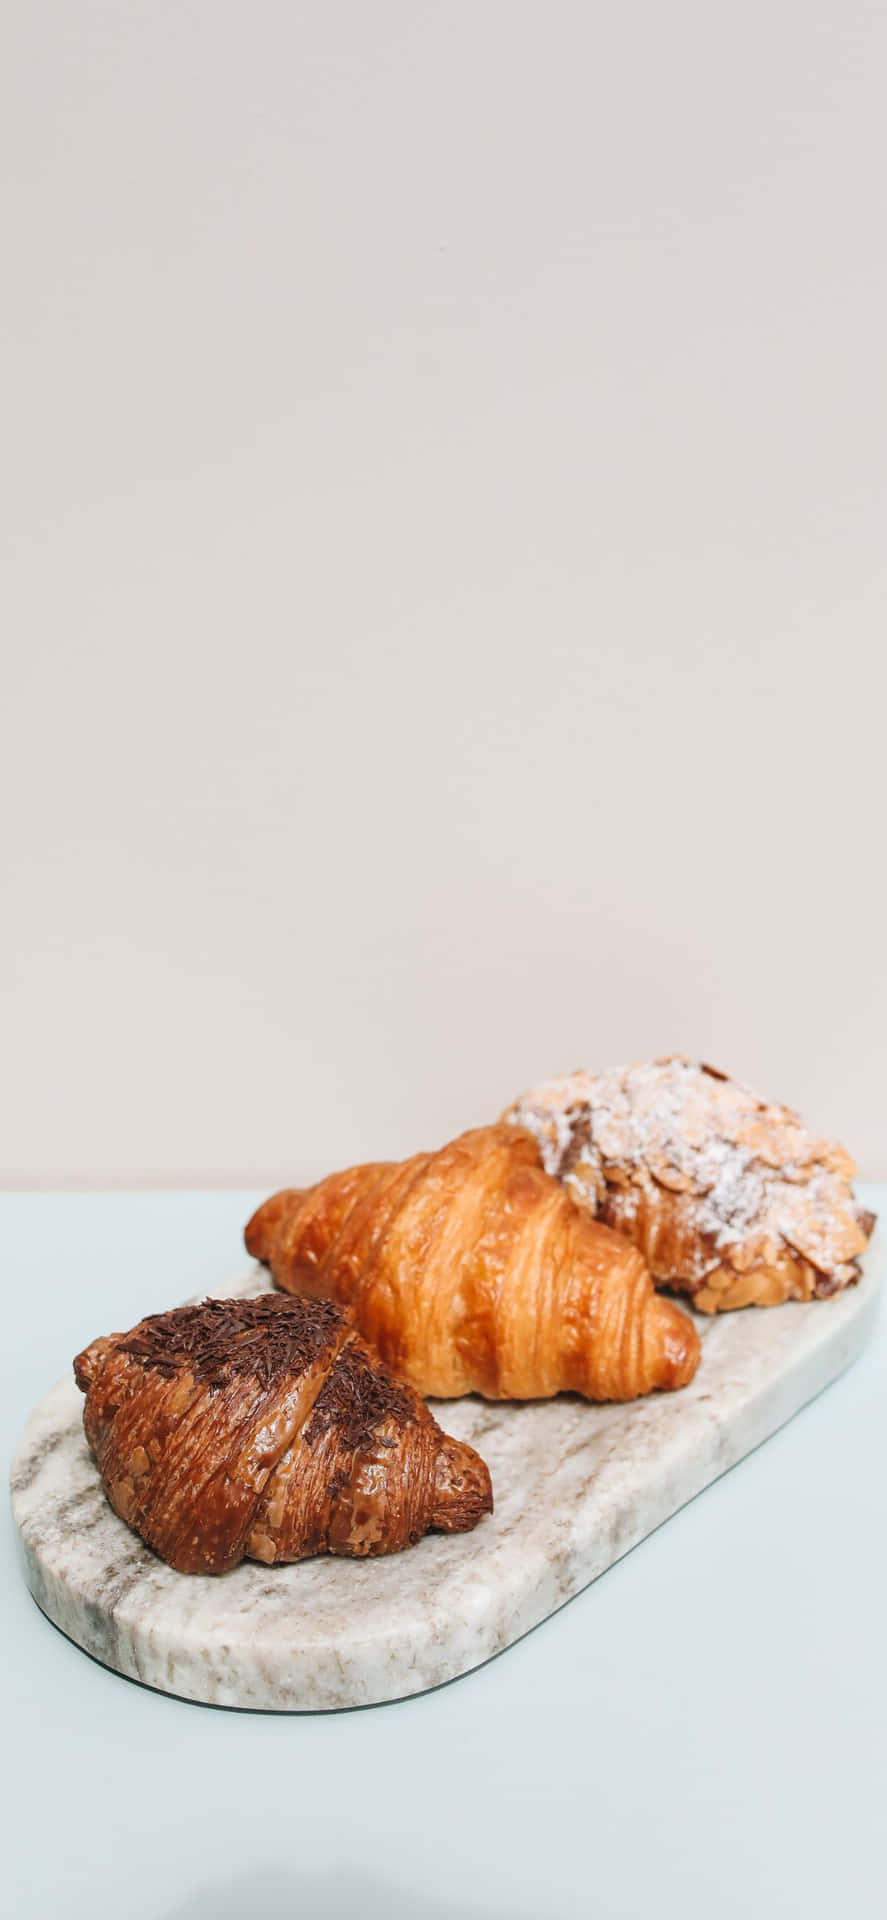 Yummy Croissants iPhone XS Pastries Background